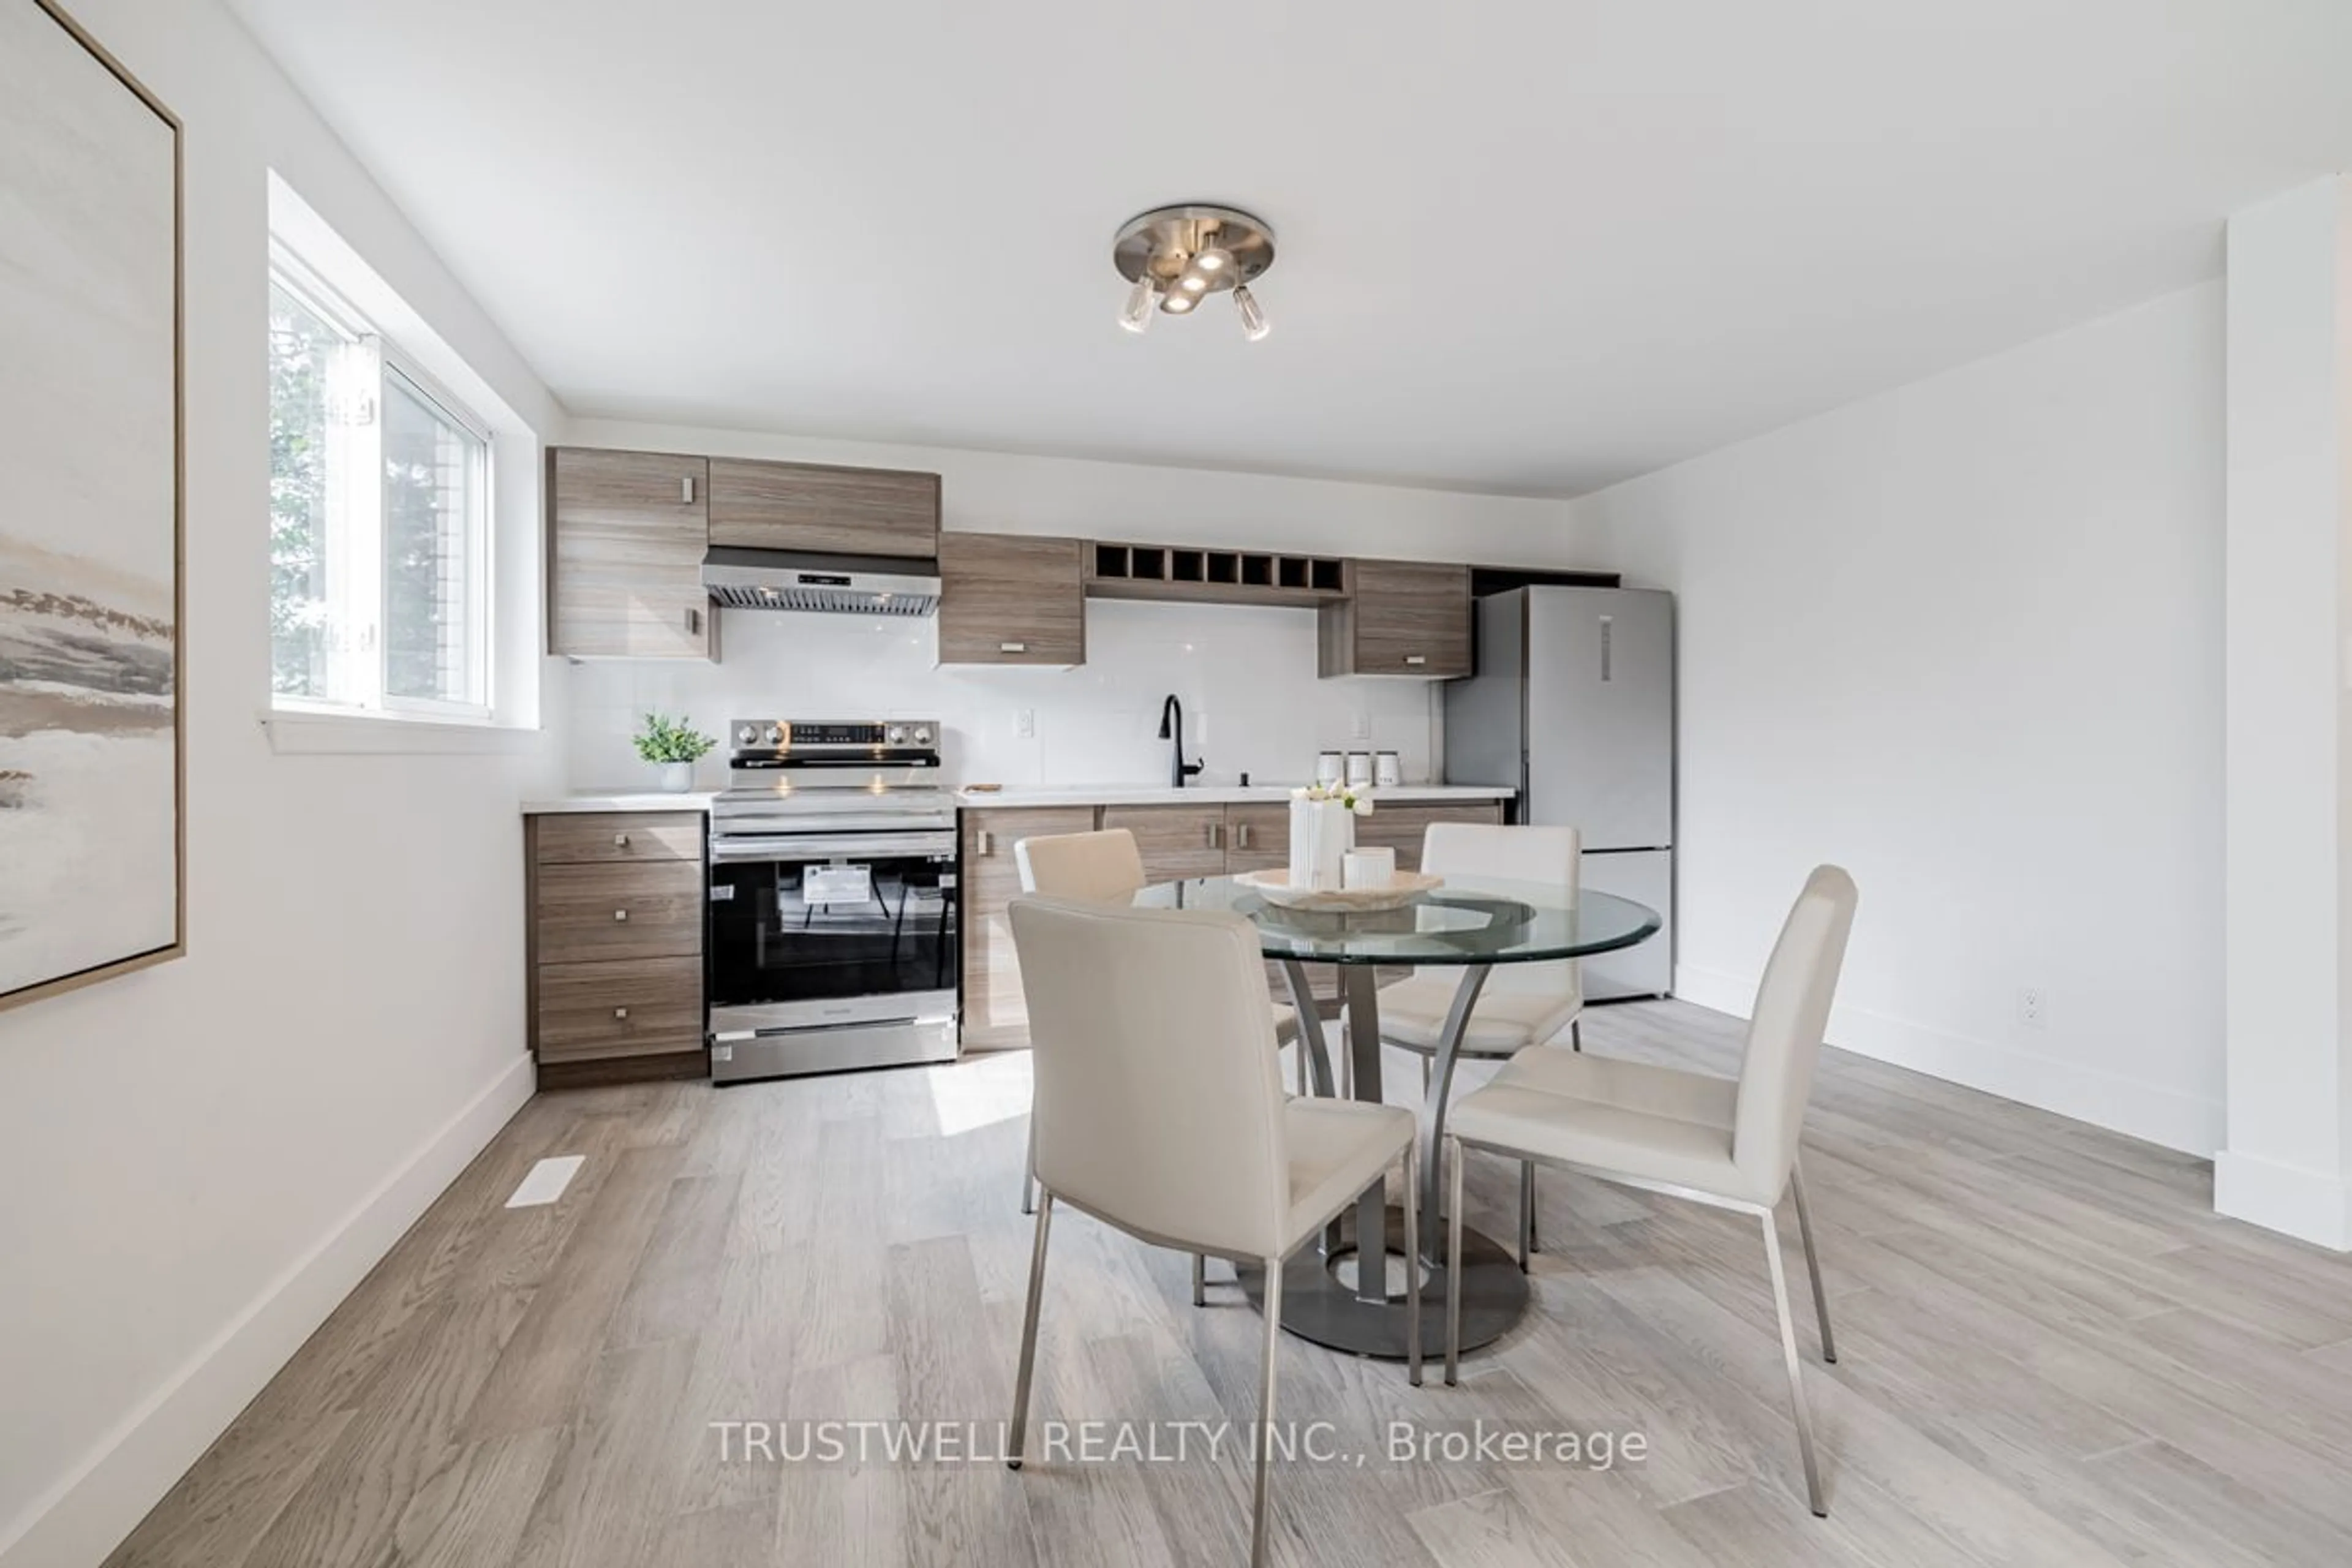 Contemporary kitchen for 66 Rameau Dr, Toronto Ontario M2H 1T7